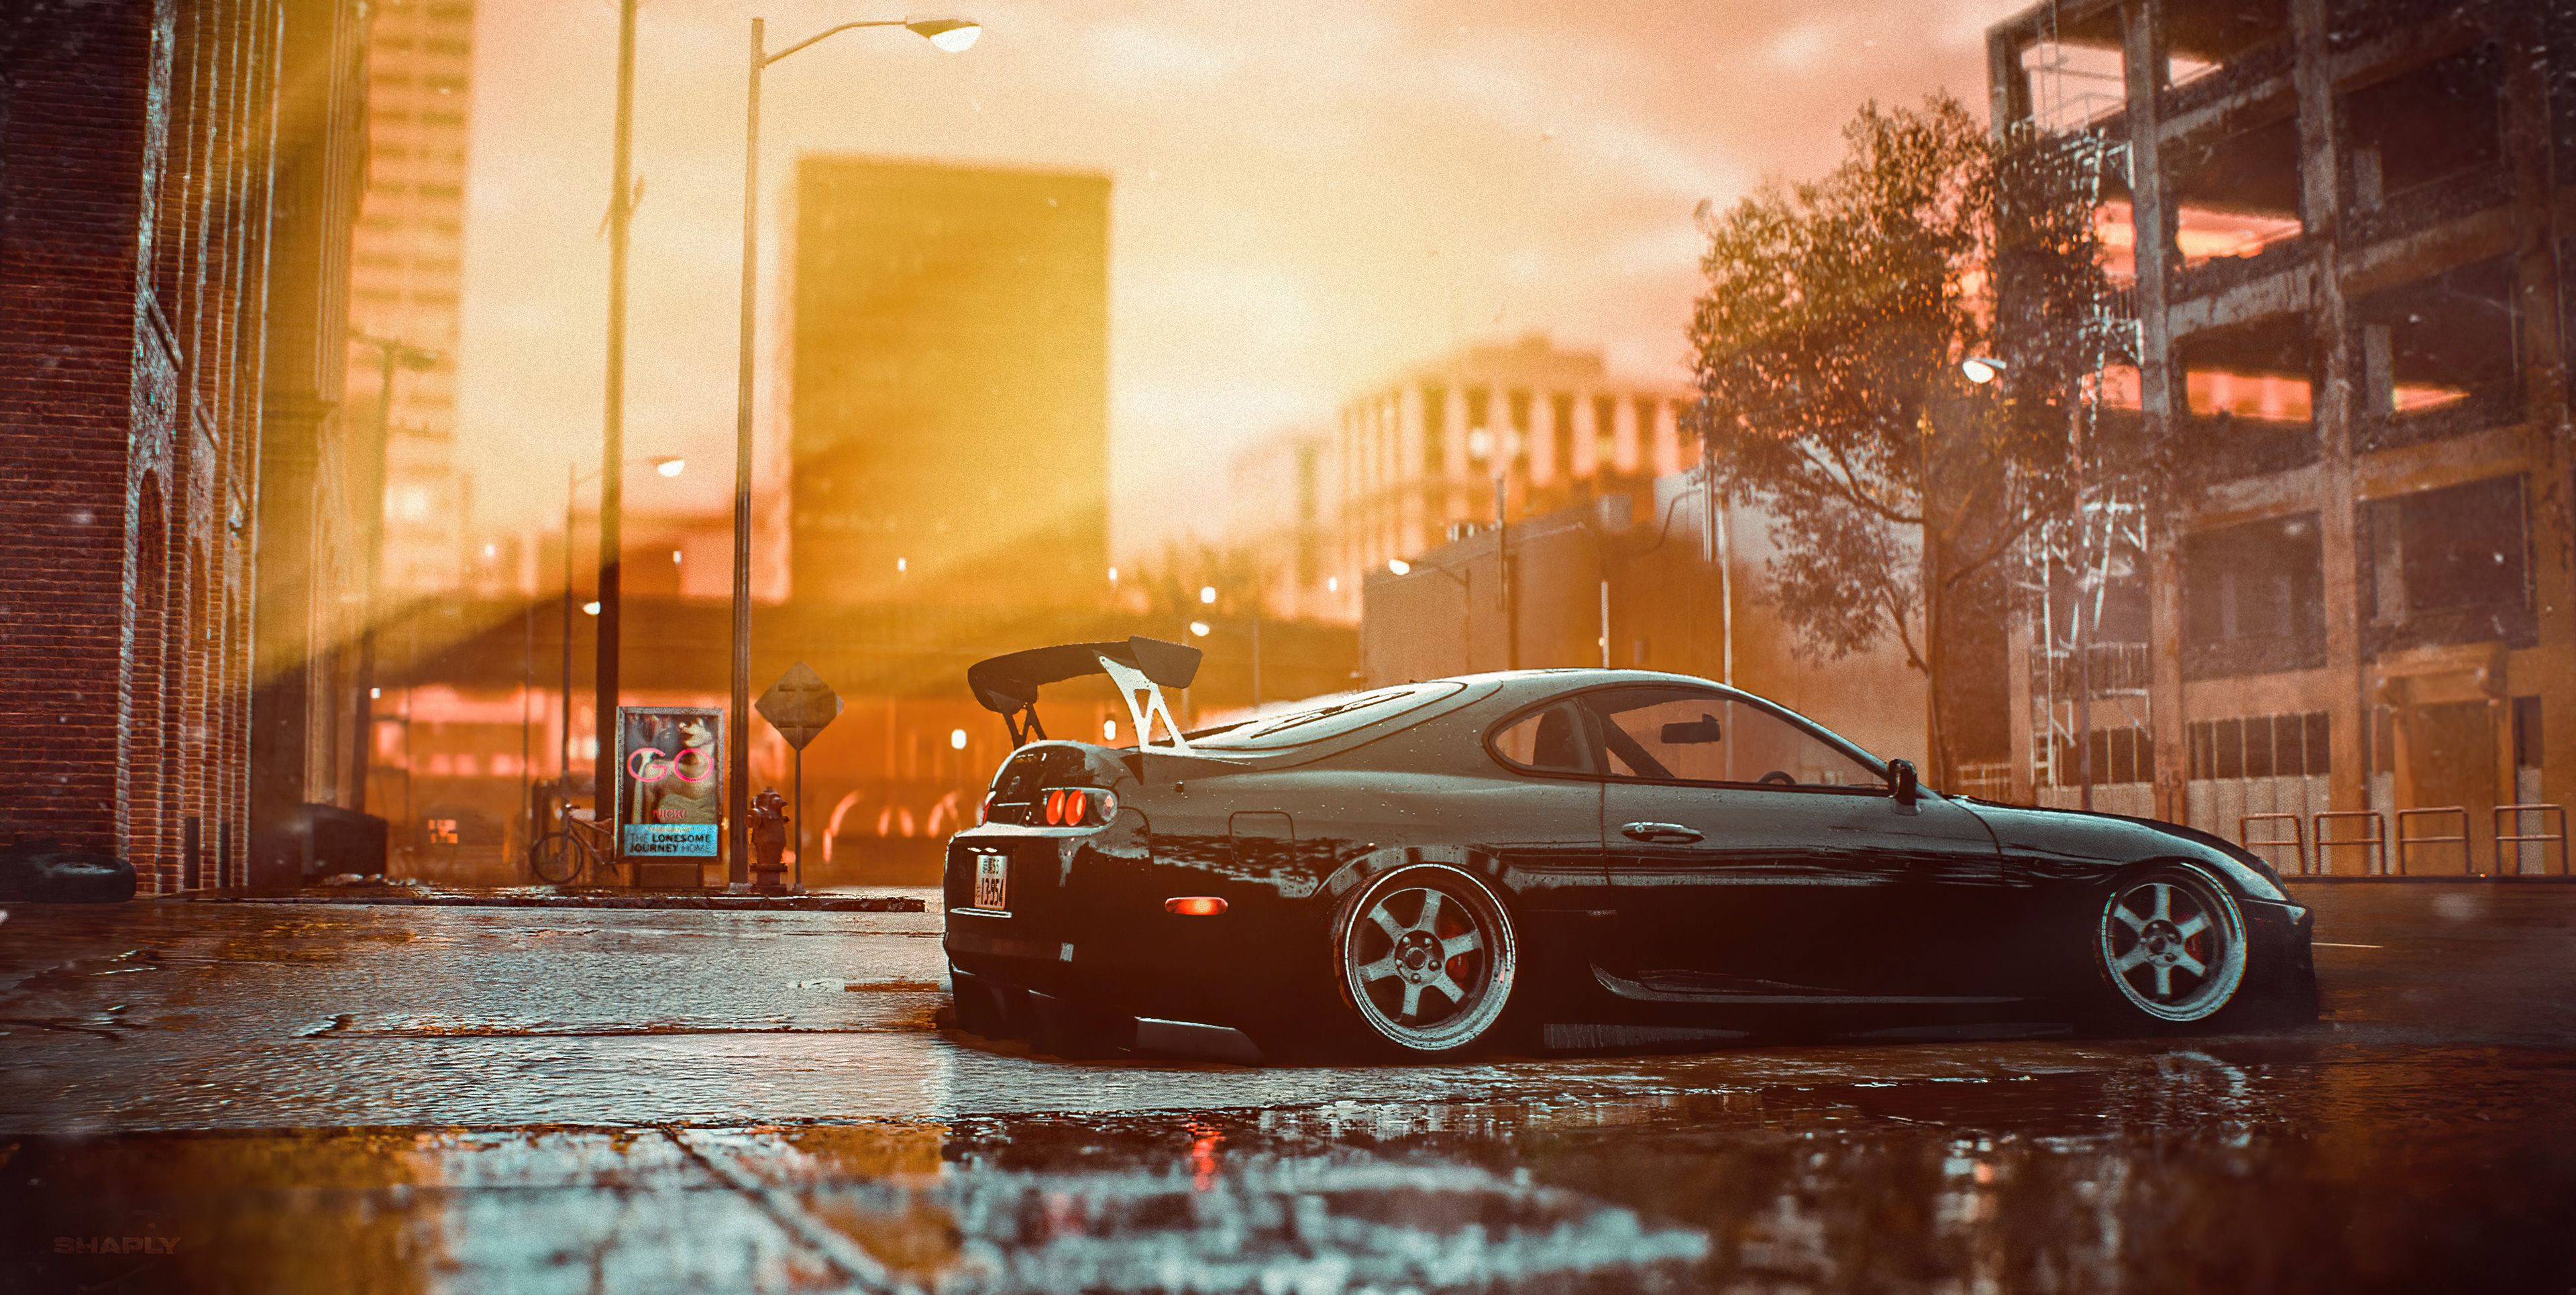 Toyota Supra Need For Speed Game 4k Toyota Supra Need For Speed Game 4k wallpaper. Toyota supra, Toyota supra mk Need for speed games